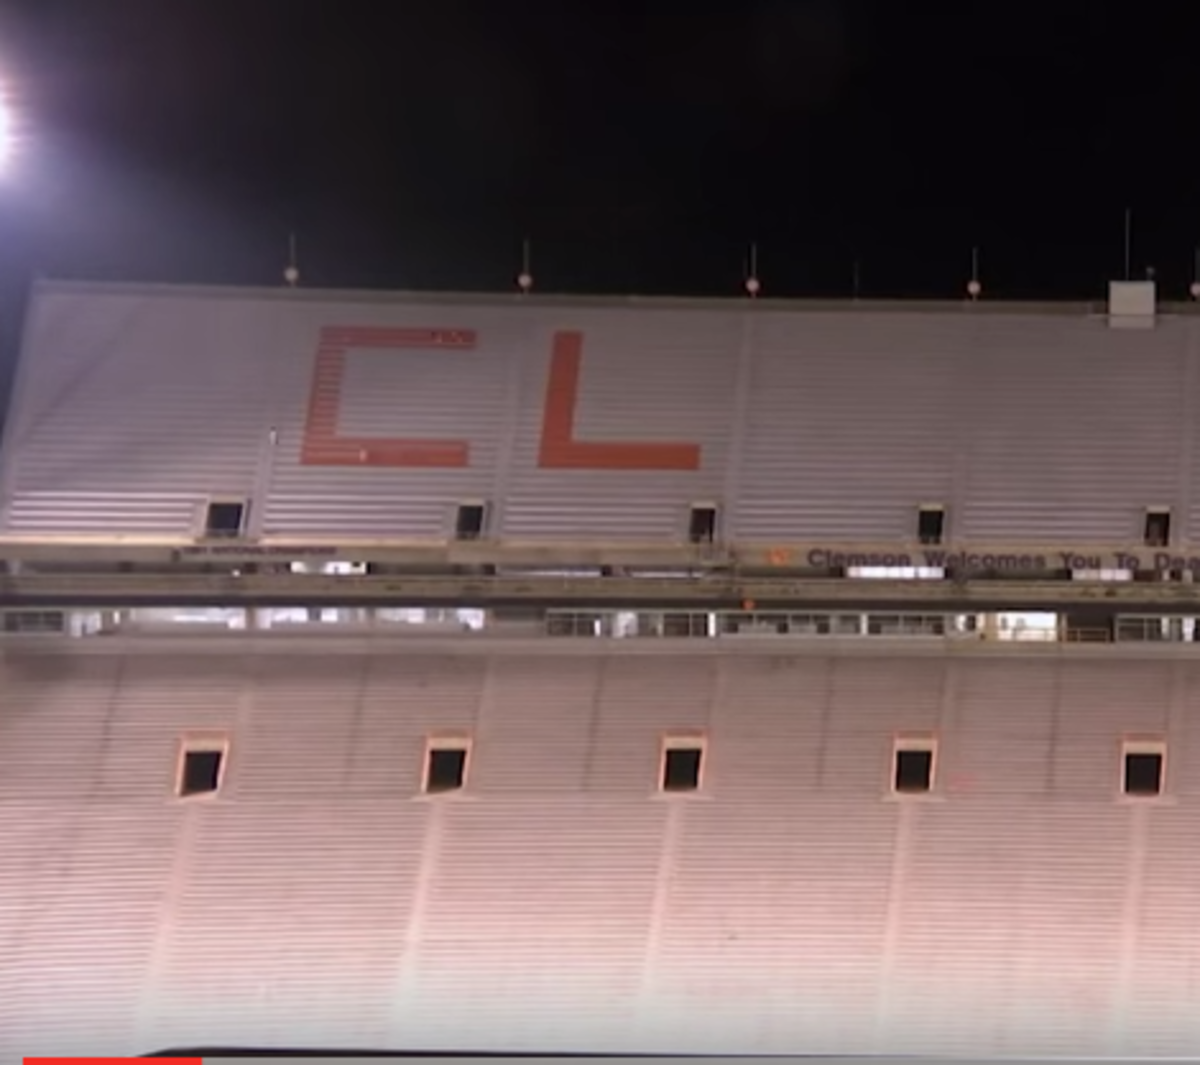 "Clemson" begins being painted on the seats of Death Valley.